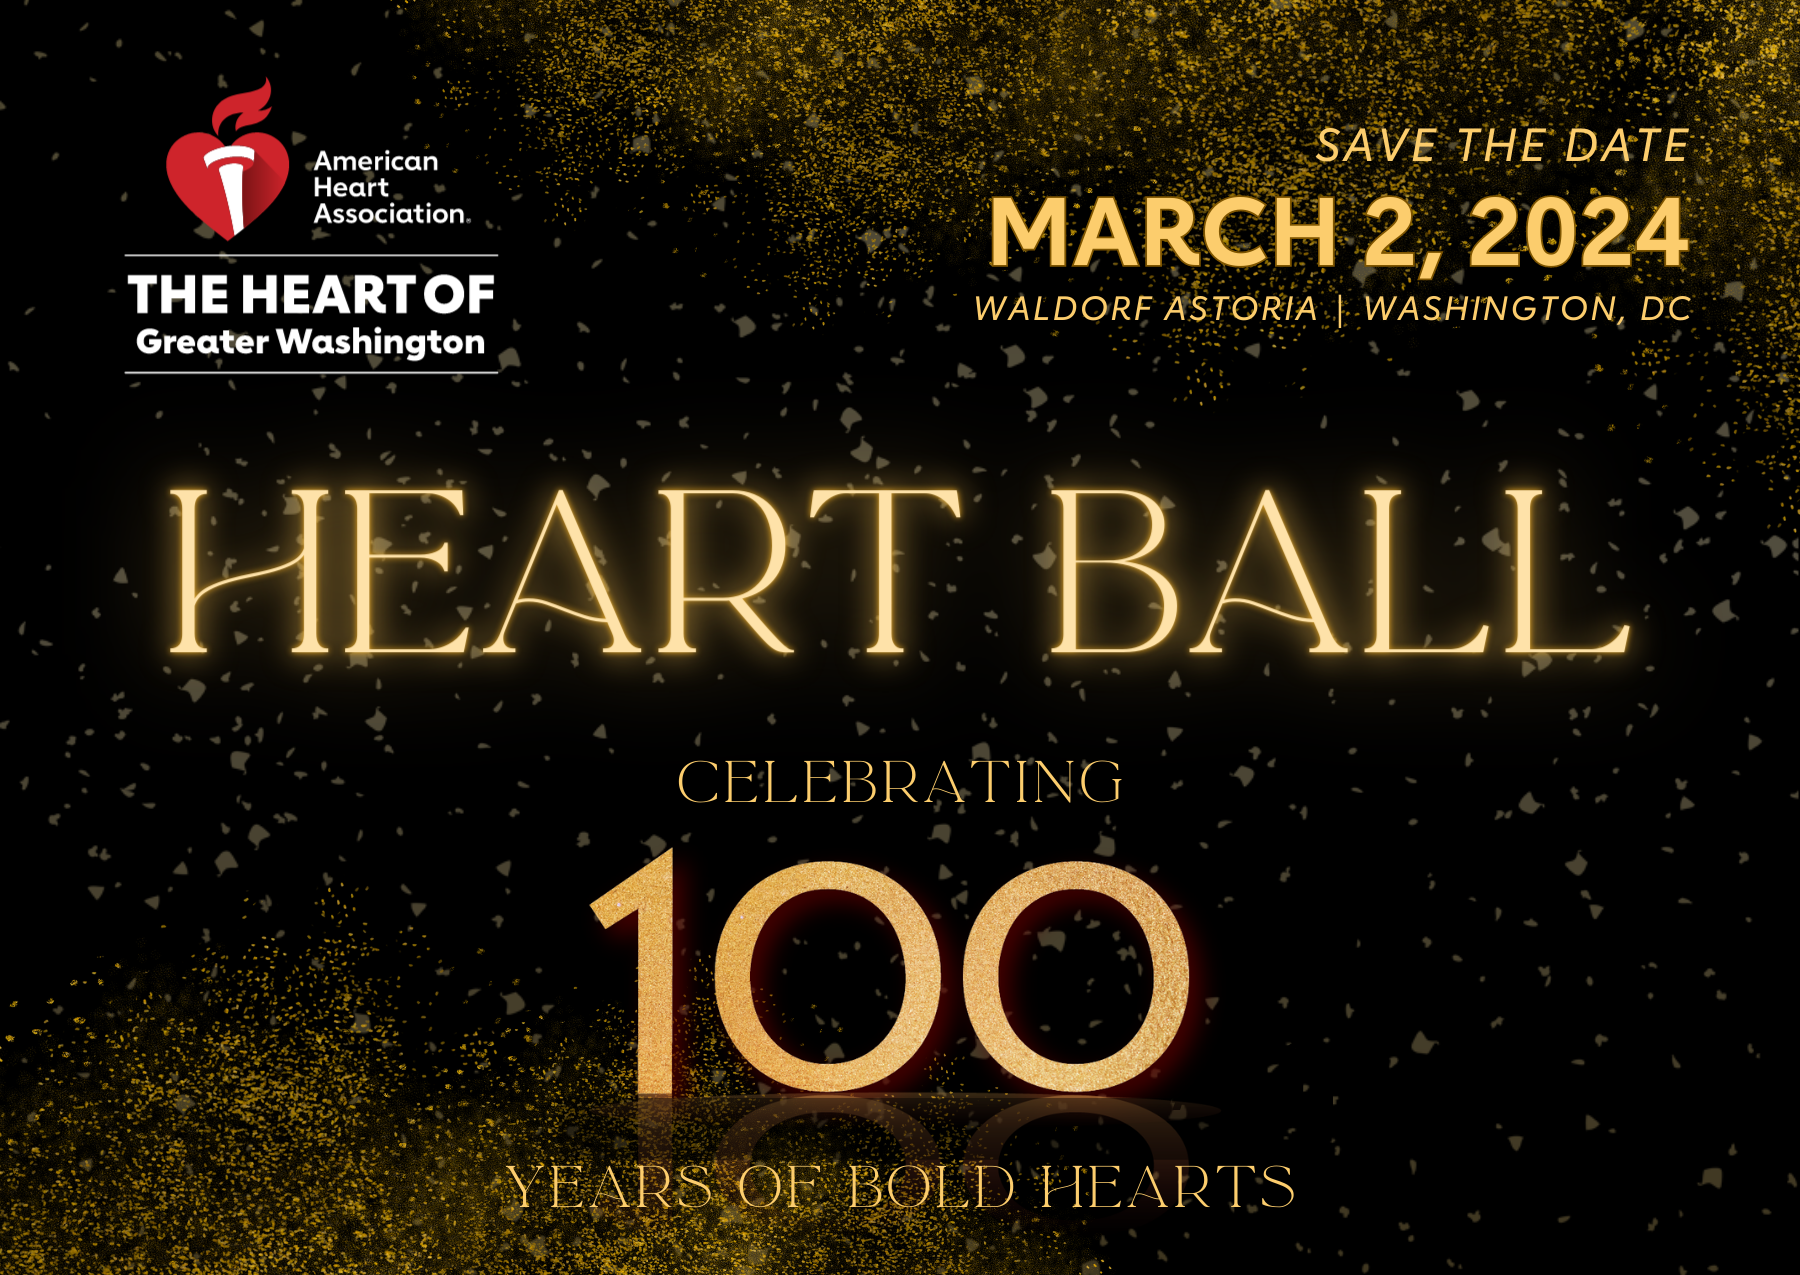 Save the Date March 2, 2024 Waldorf Astoria, Washington DC Heart Ball celebrating 100 years of bold hearts.